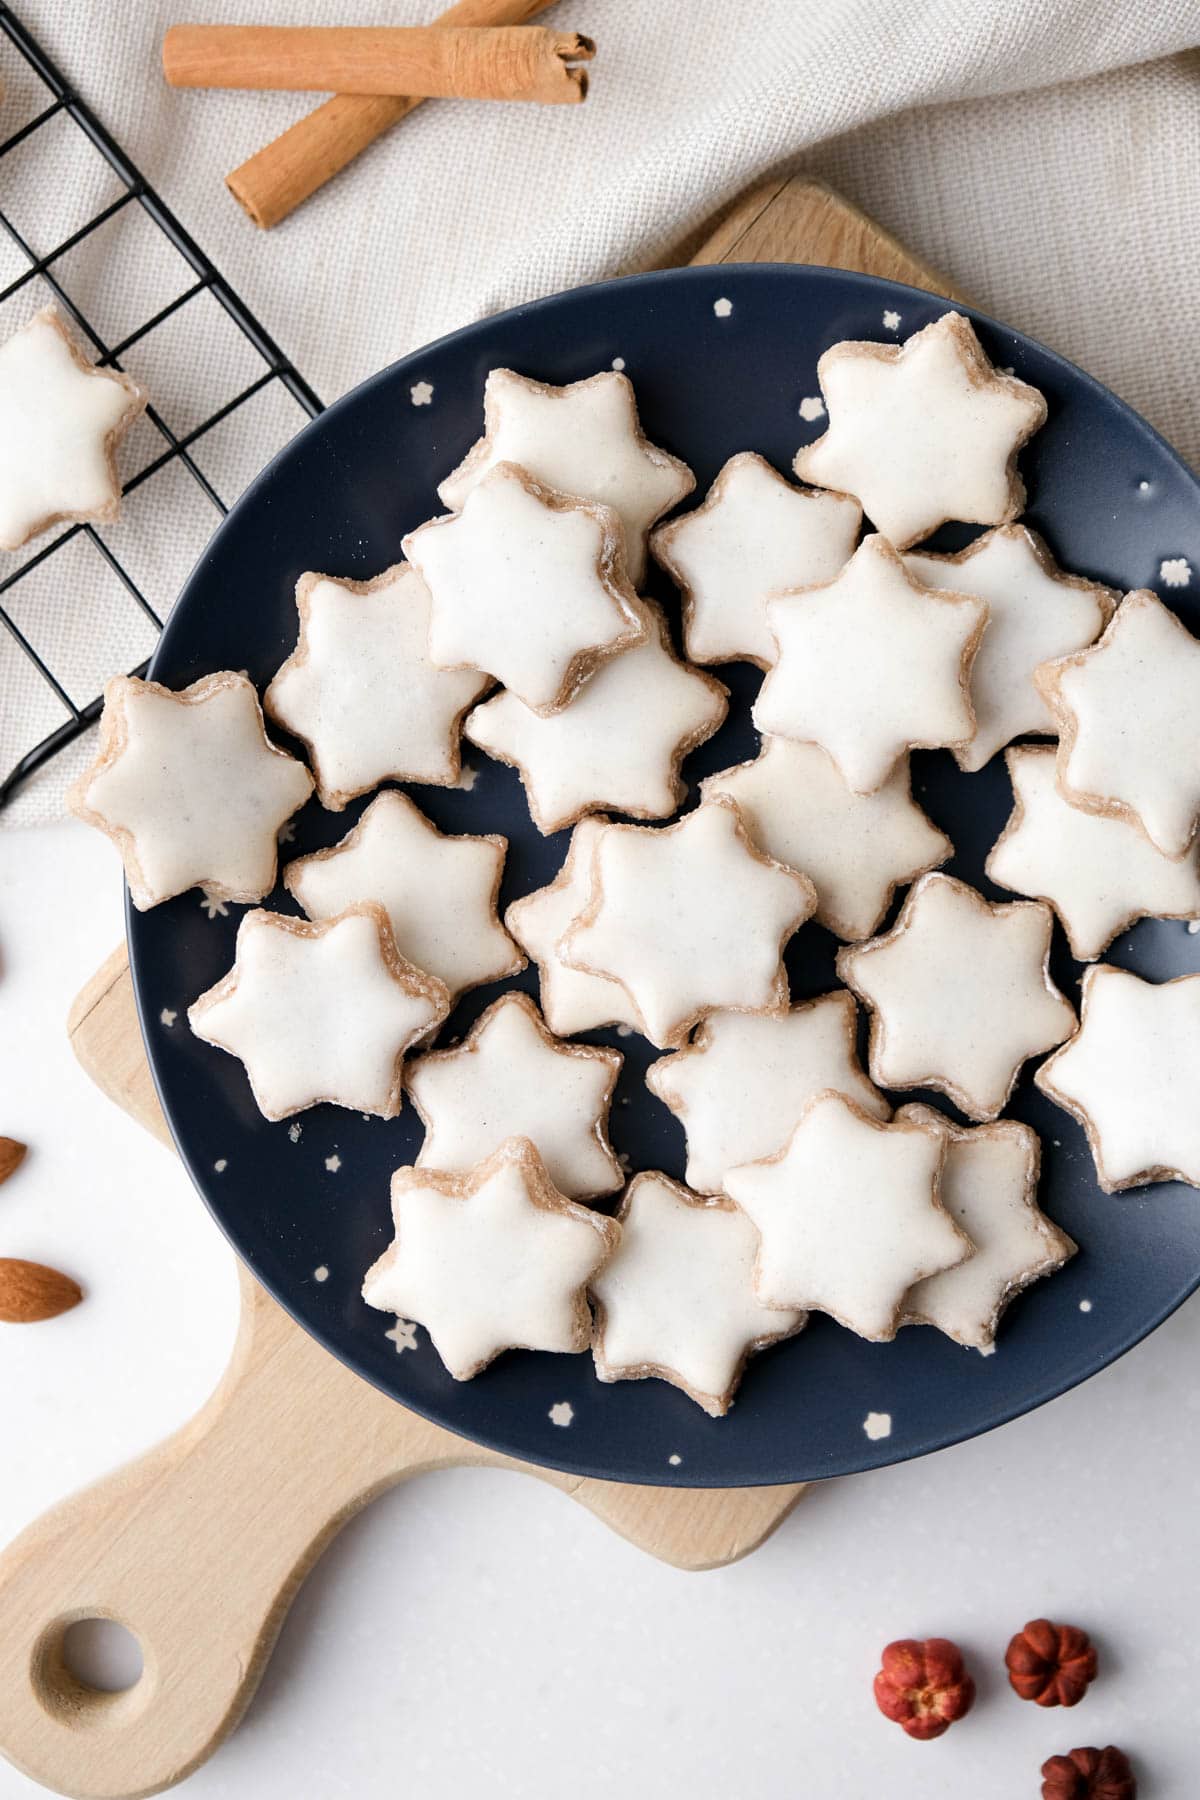 cinnamon star cookies with icing on blue plate sitting on wooden board with cookies and almonds around.